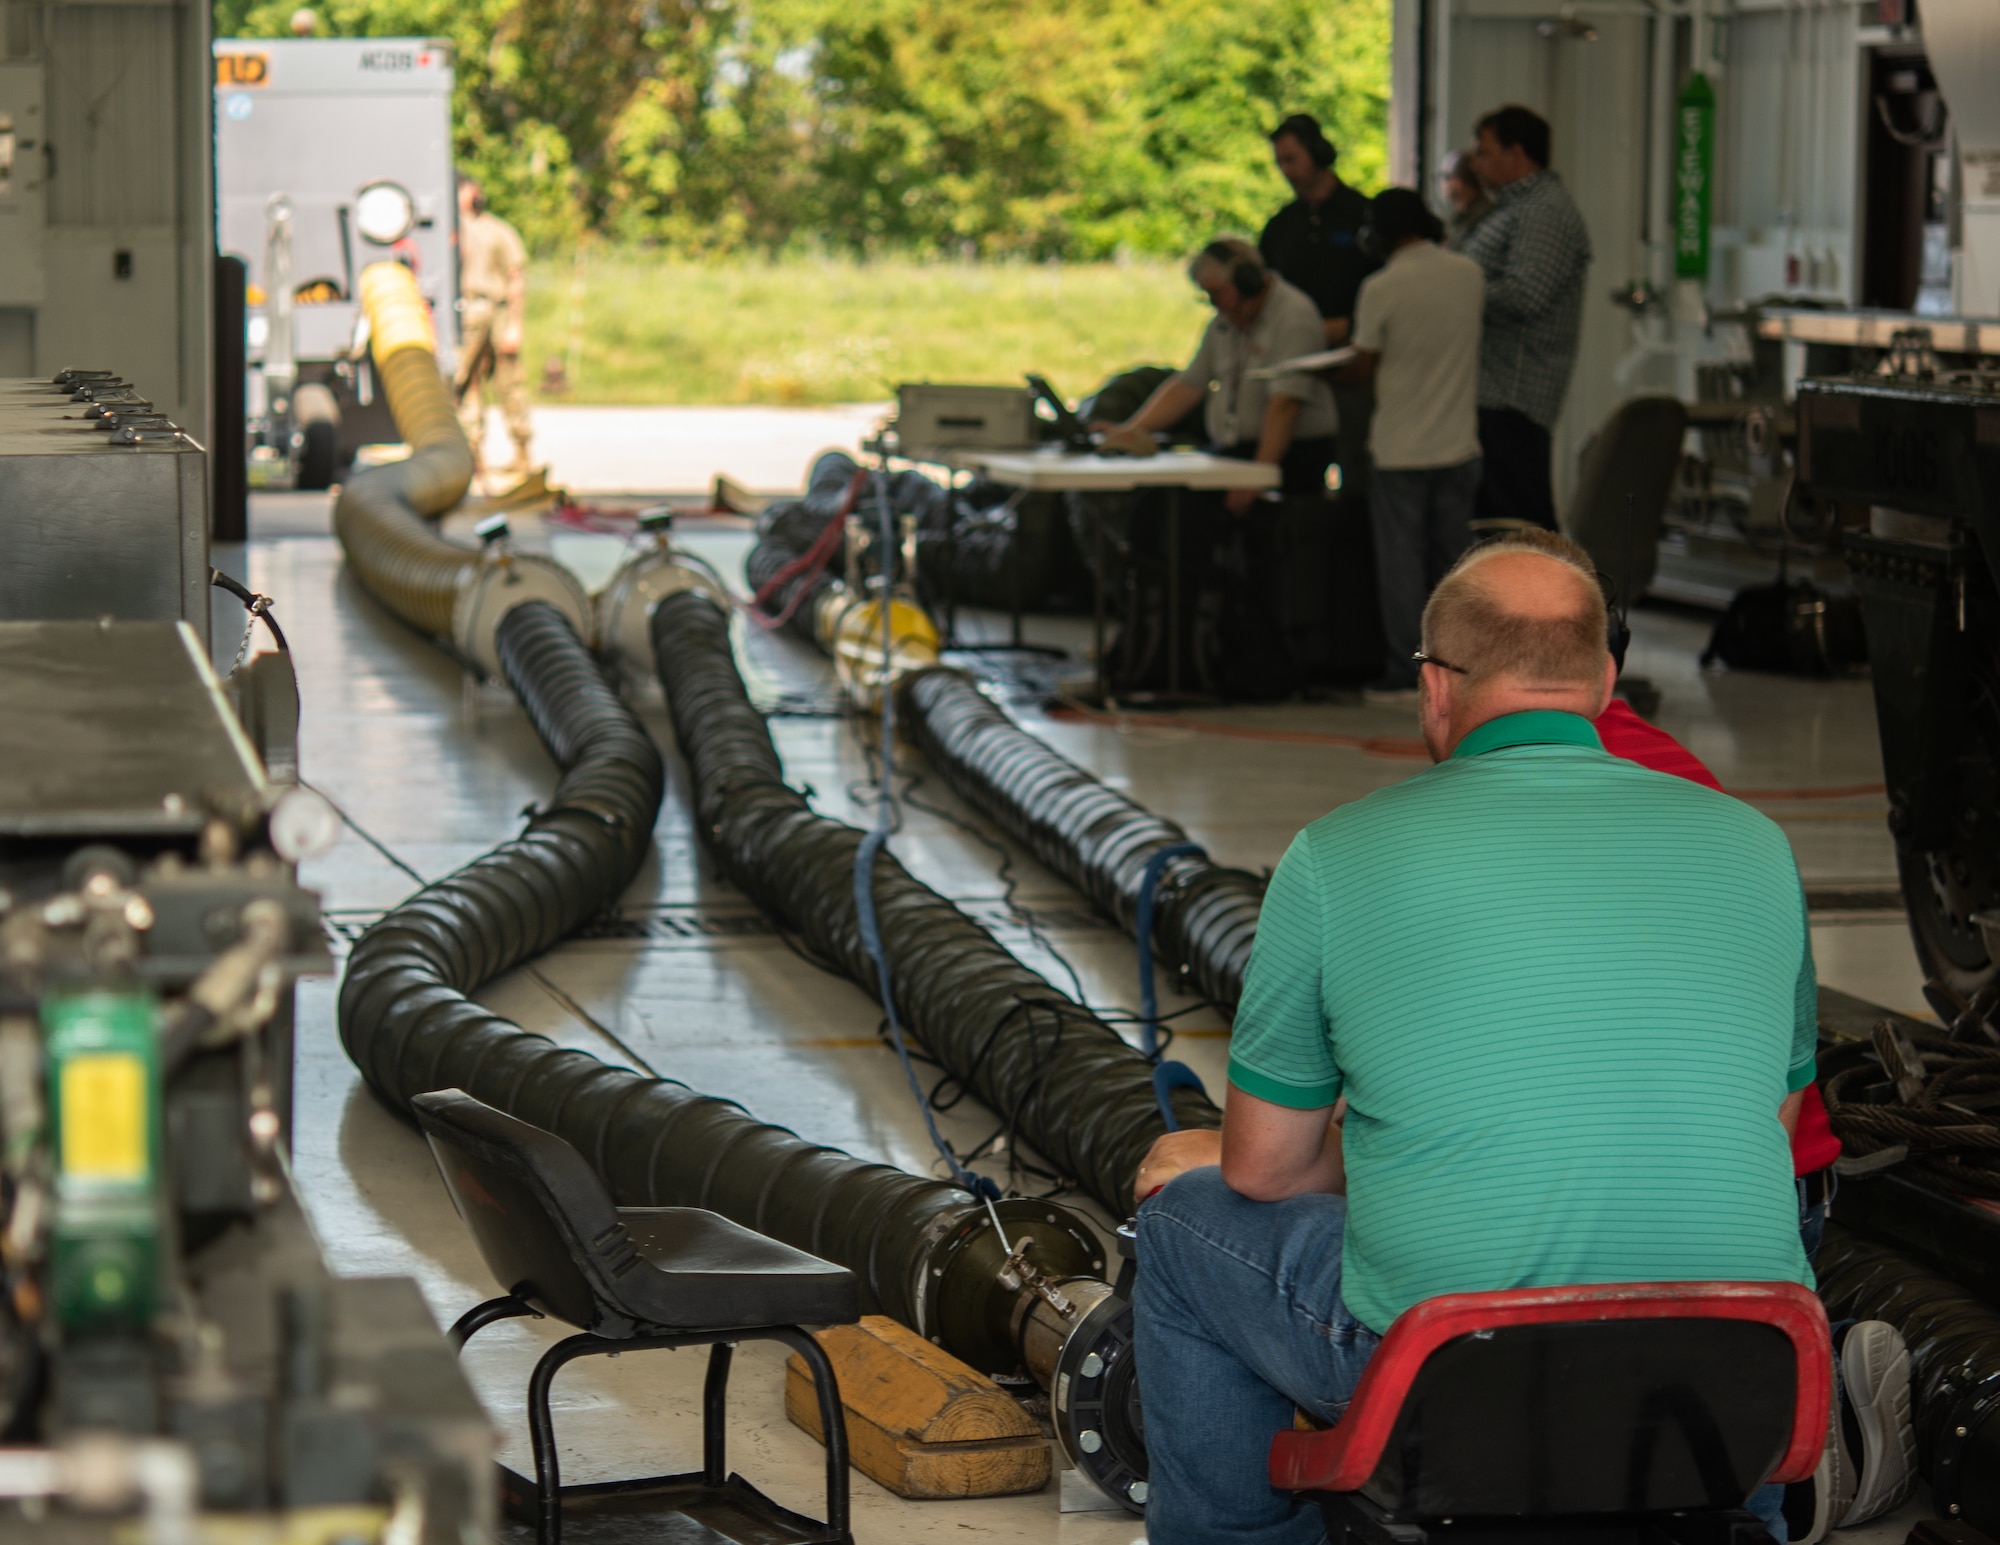 Members from the Air Force Material Command and the Dayton Research Institute,  test a potential B-2 HVAC system for the B-2 Spirit Stealth Bomber on July 18, 2019, at Whiteman Air Force Base, Missouri. A total of five HVAC carts are being tested in 15 different configurations in order to determine, which cooling option will best fit the B-2 mission. (U.S. Air Force photo by Senior Airman Thomas Barley)